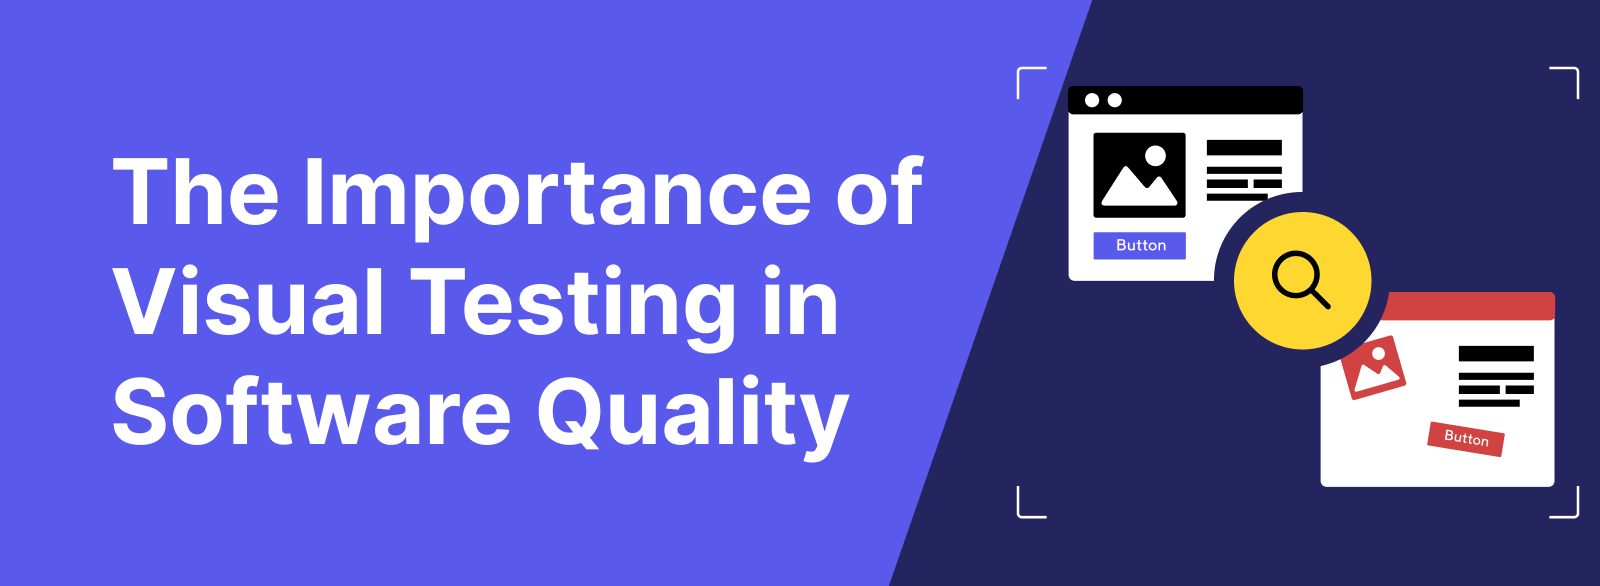 Importance of visual testing-banner.png